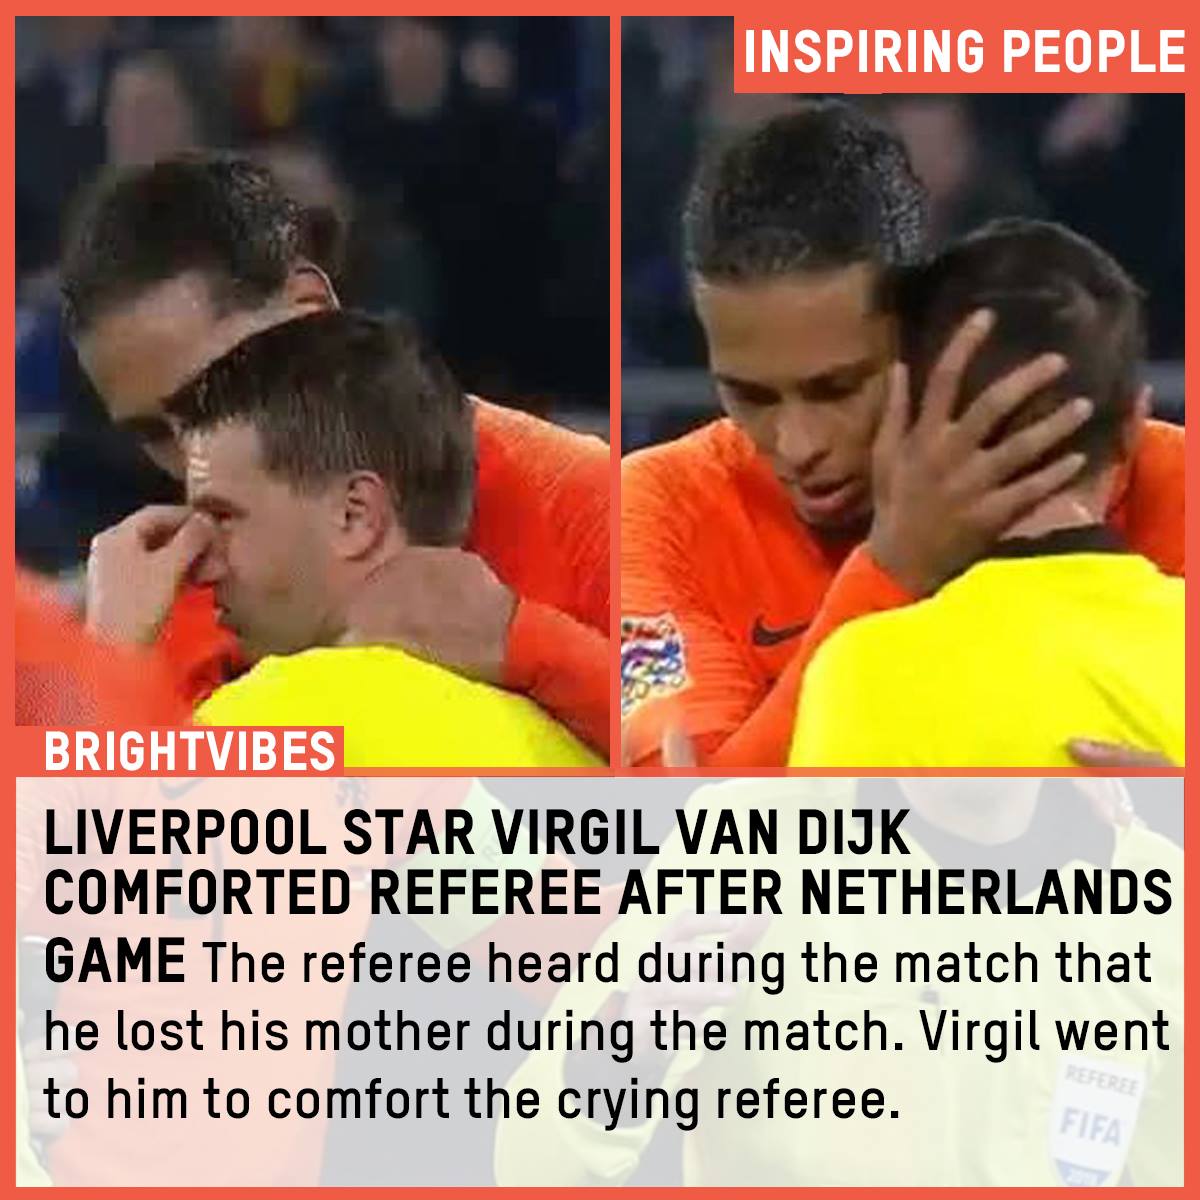 In a display of kindness witnessed all around the world, just moments after his dramatic equaliser sent the Netherlands through to 2018's Uefa Nations League semi-finals and teammates were celebrating, van Dijk approached the referee and gave him a heart warming hug.